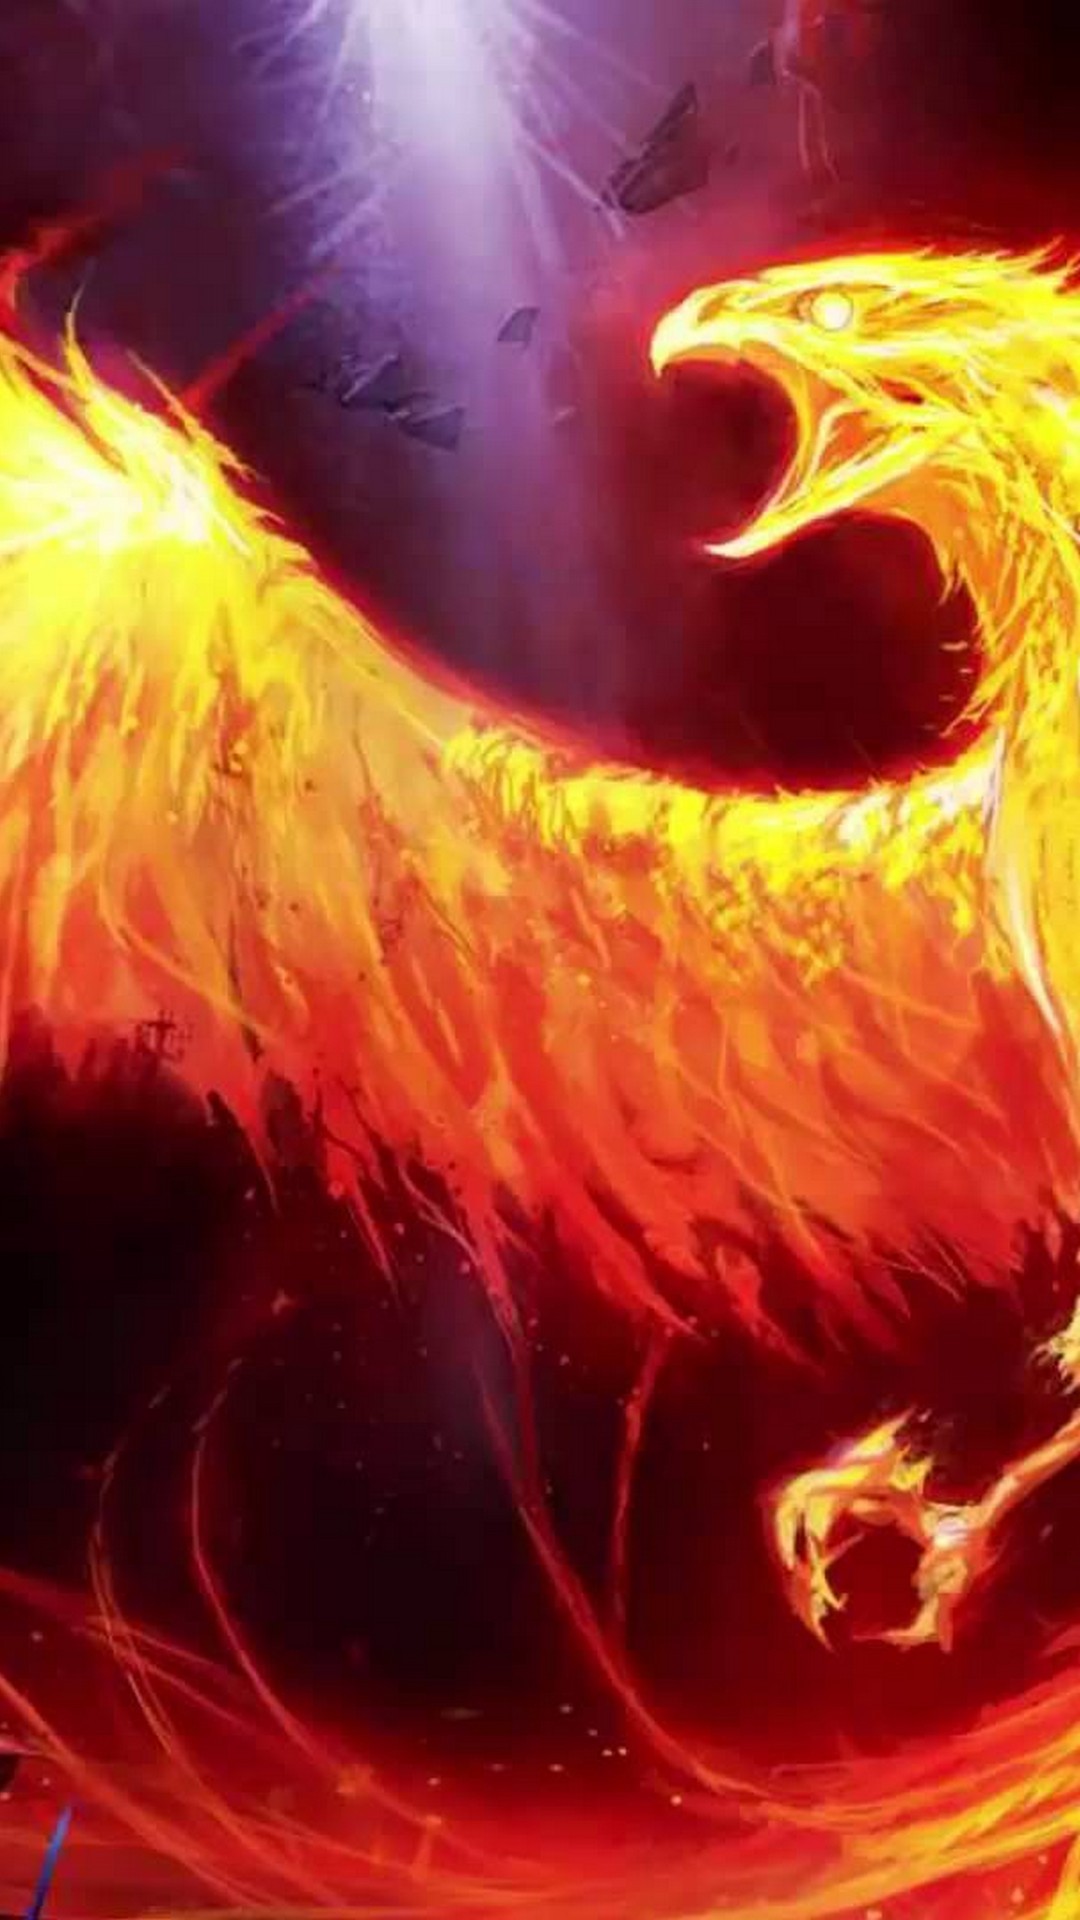 Android Wallpaper HD Phoenix with resolution 1080X1920 pixel. You can make this wallpaper for your Android backgrounds, Tablet, Smartphones Screensavers and Mobile Phone Lock Screen